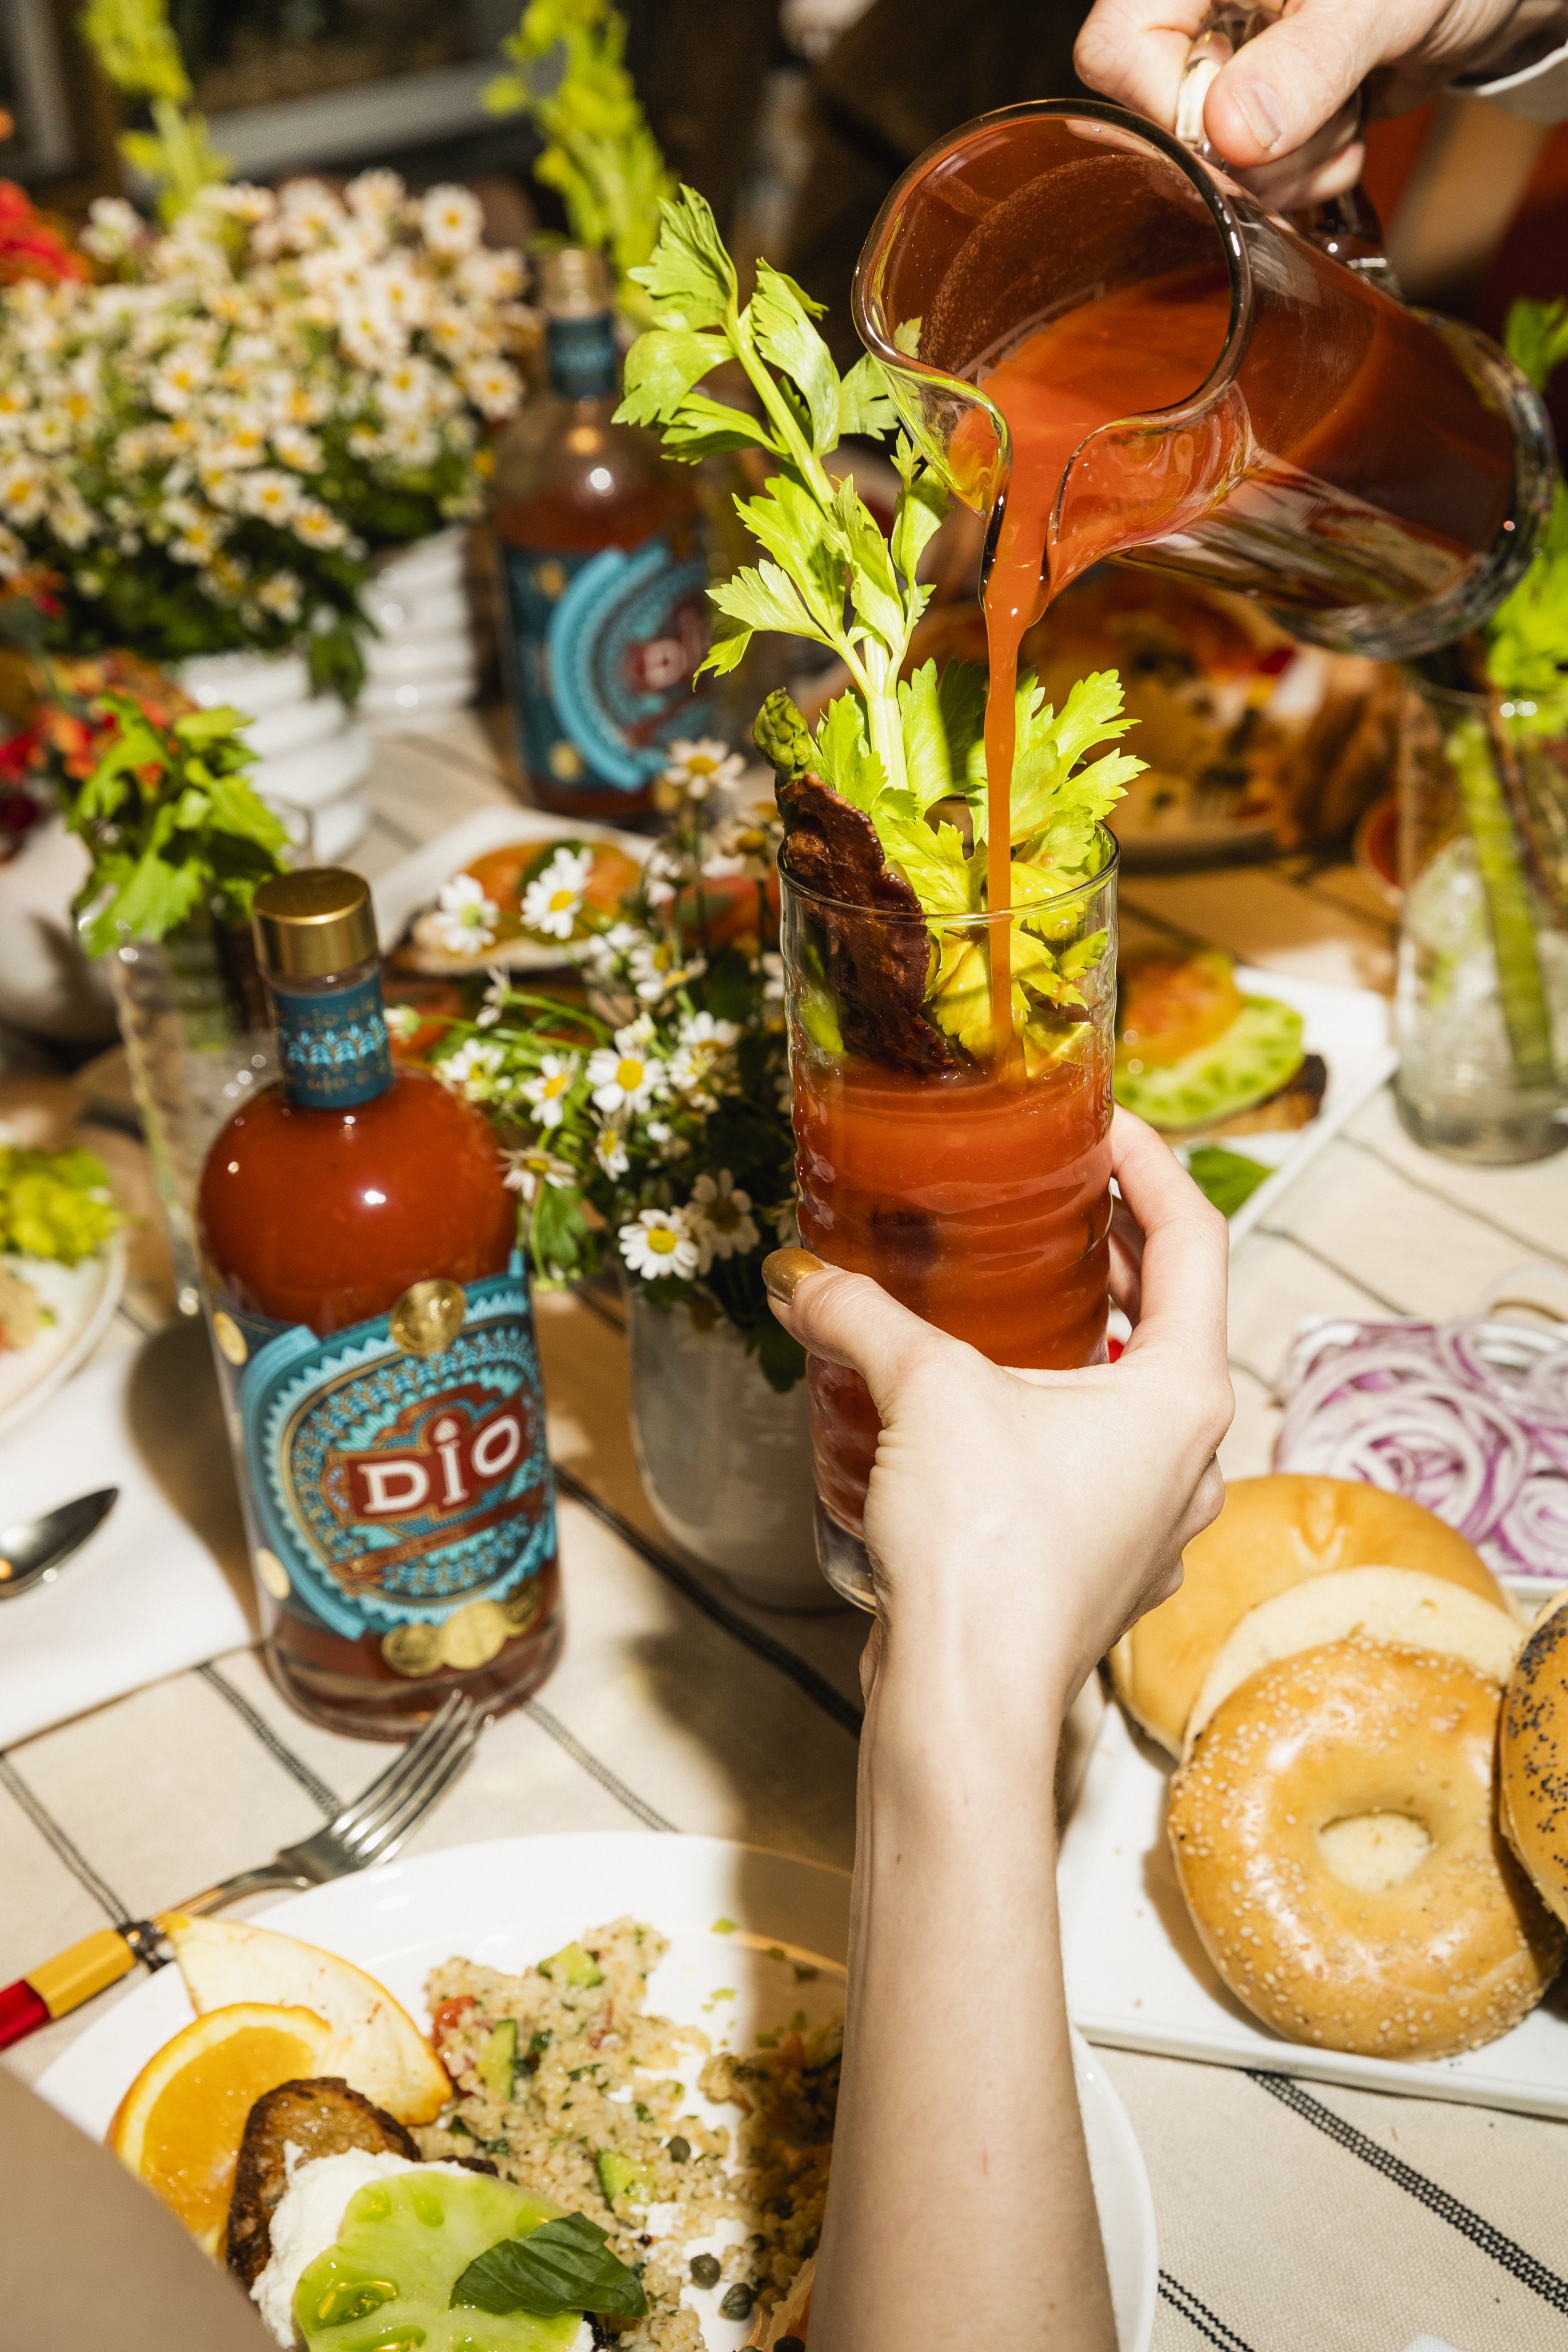 A table set for a party featuring cocktails mixed with Drink Dio